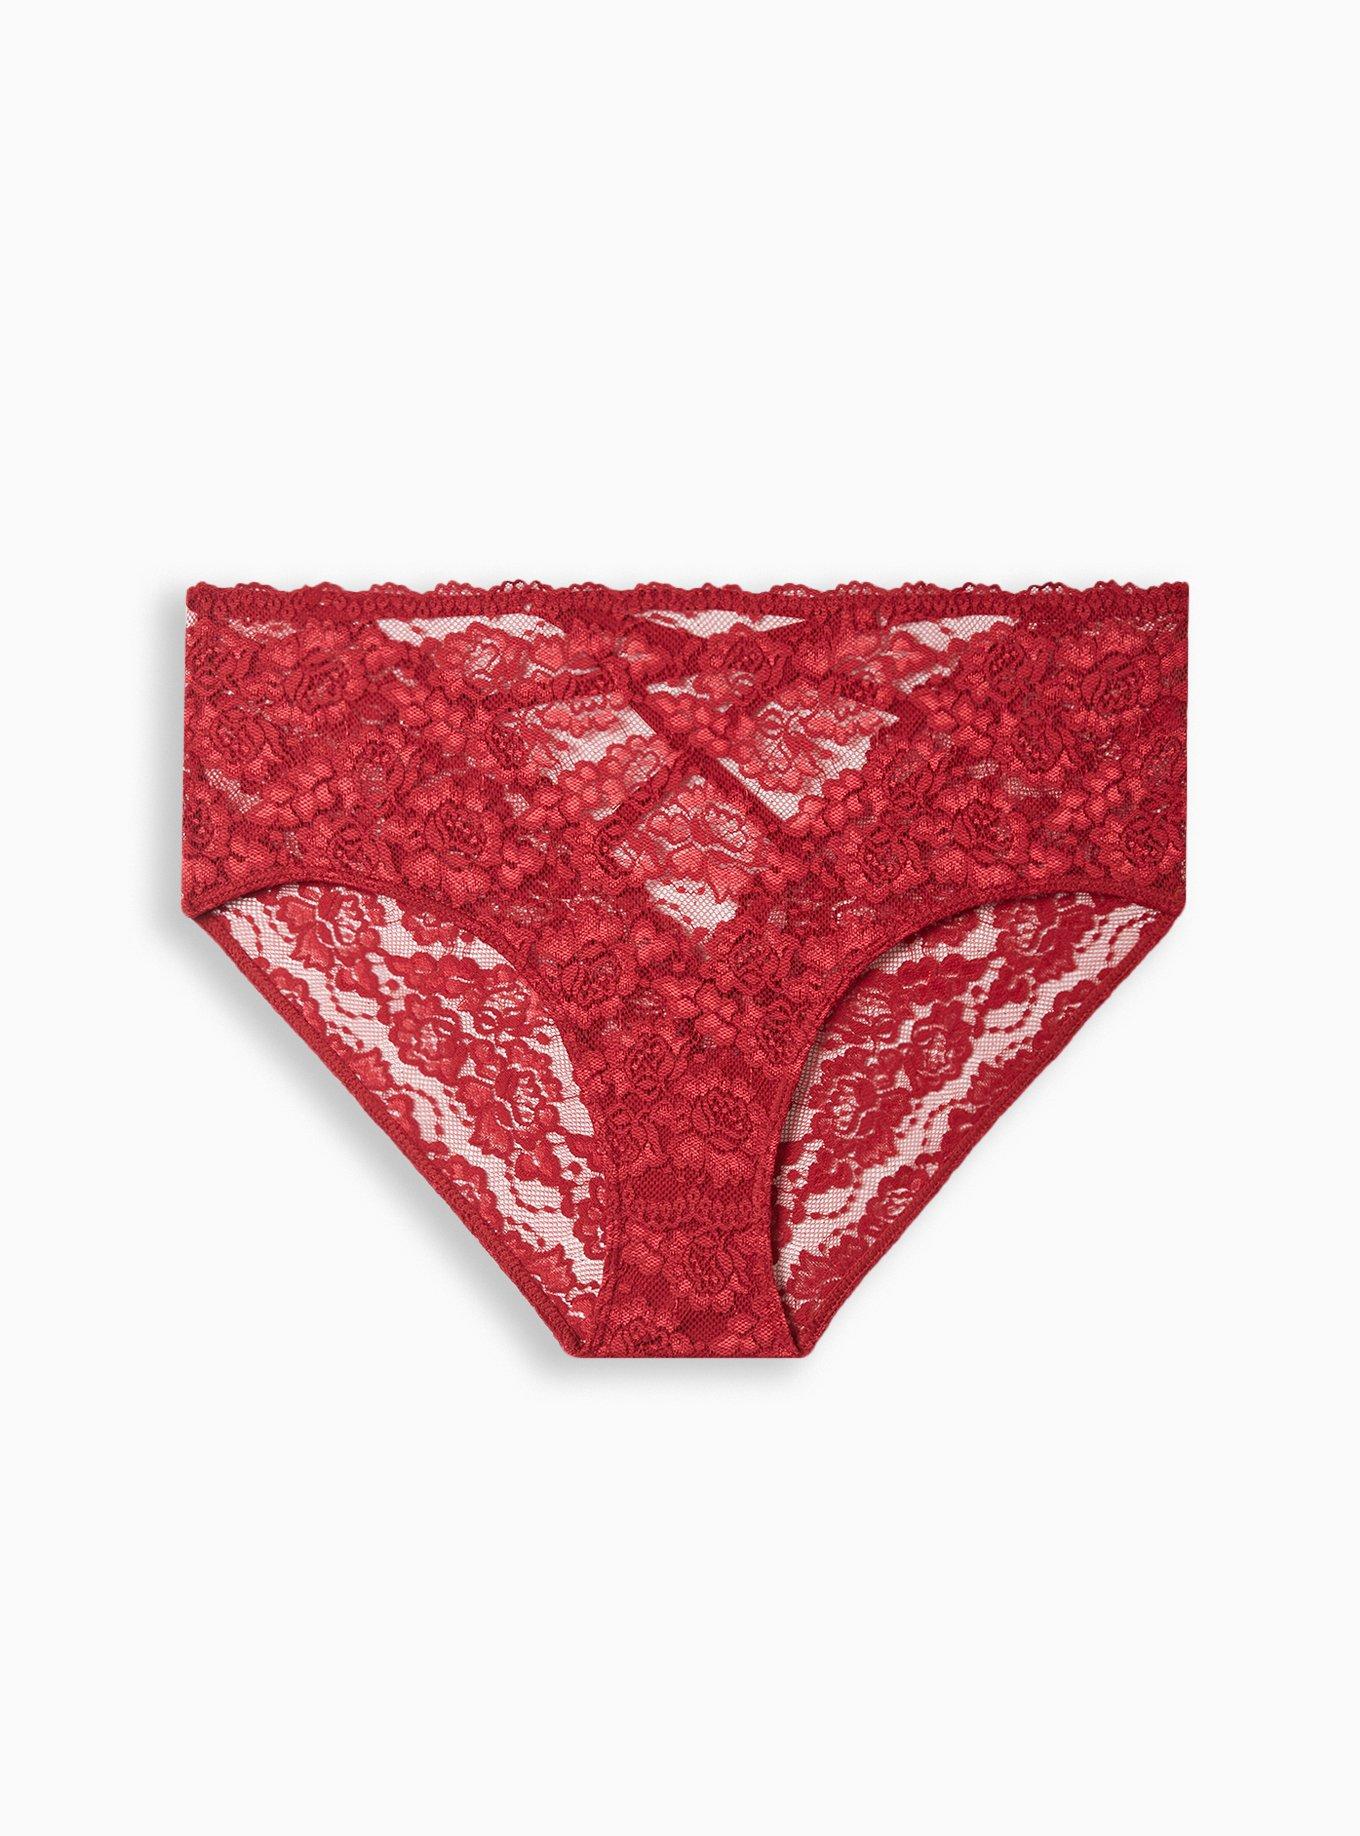 Torrid Sexy Lipstick Red Lace Bralette & Caged Panty SET Plus Size 1X,  14/16